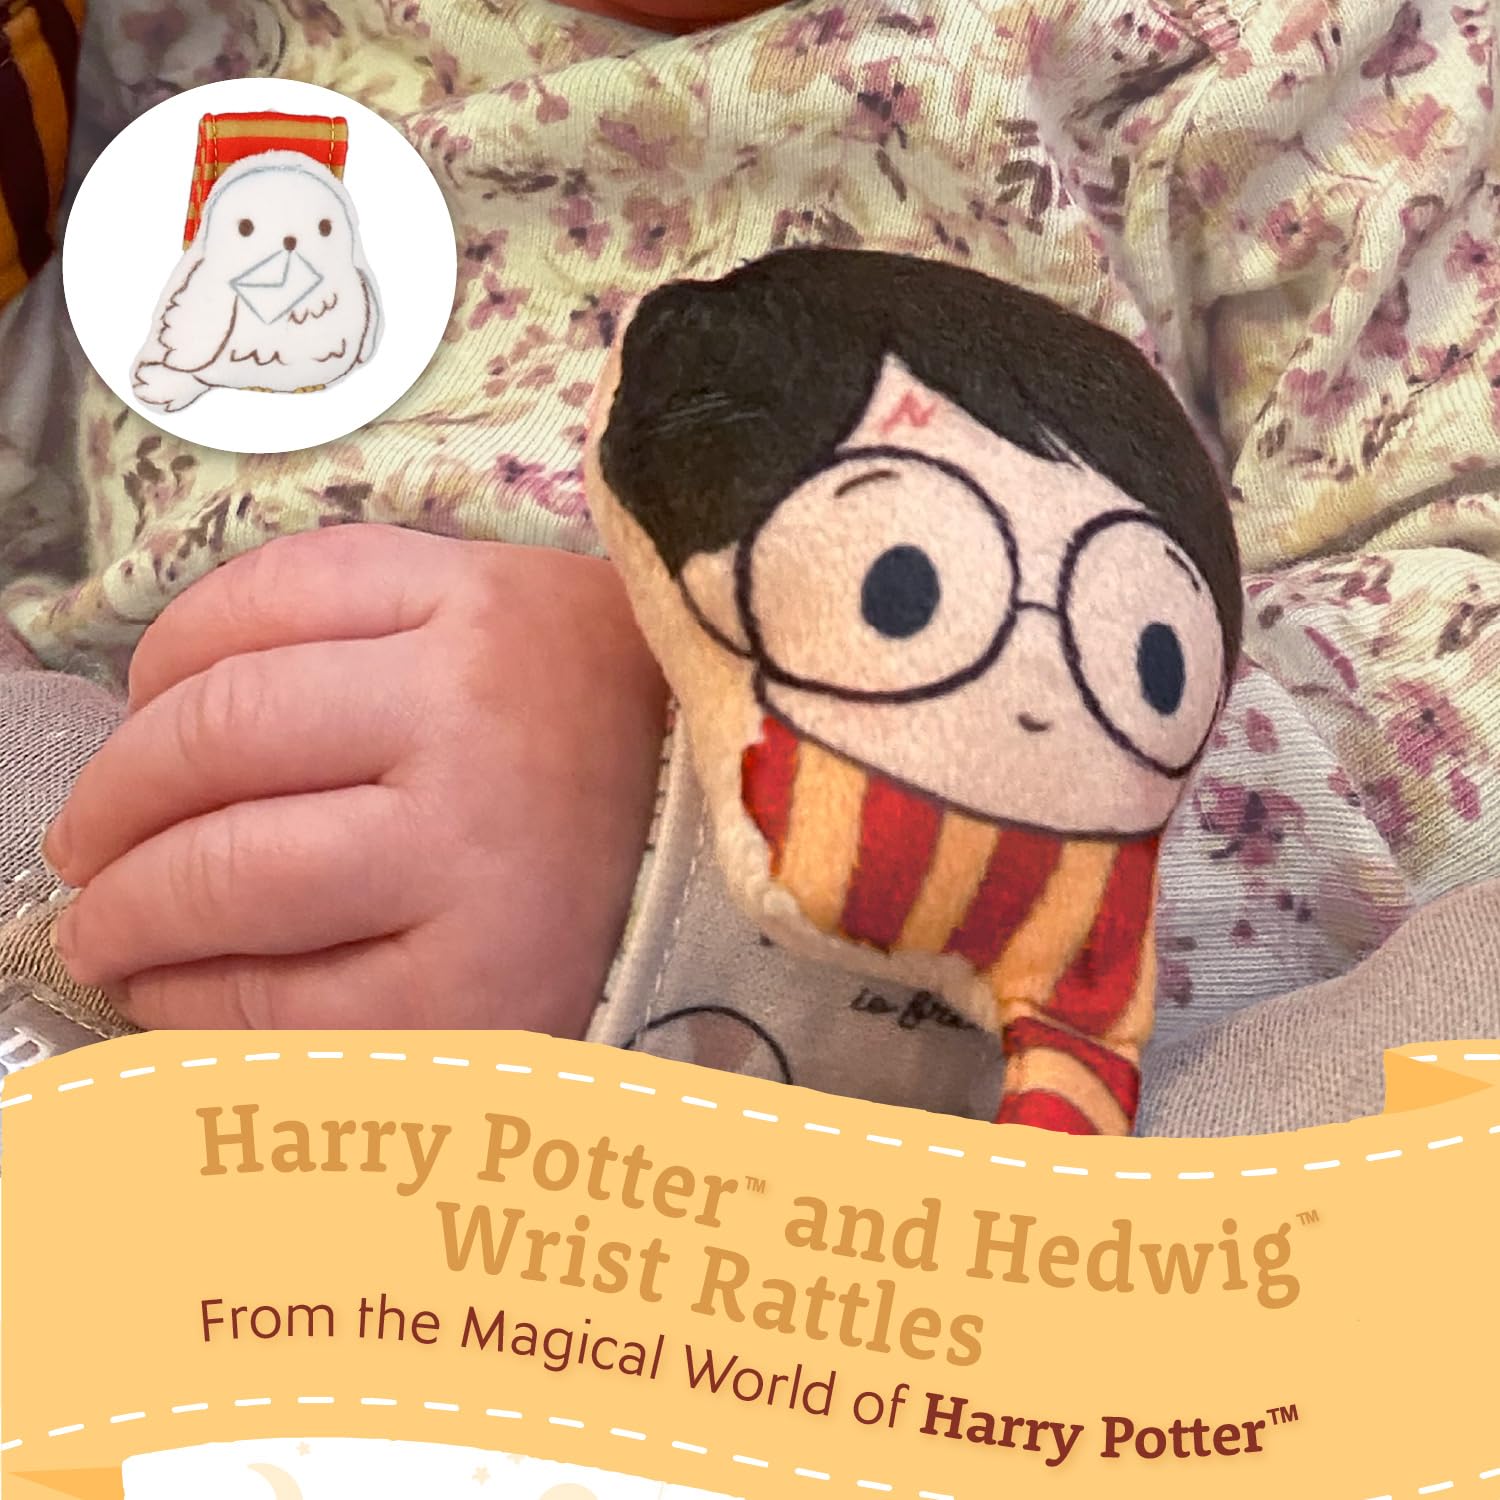 KIDS PREFERRED Harry Potter Hedwig Baby Infant Wrist Rattles with Hedwig Plush Rattle - Soft Baby Wrist Rattles Encourage Leaning Development Newborn to 12 Months Boys and Girls